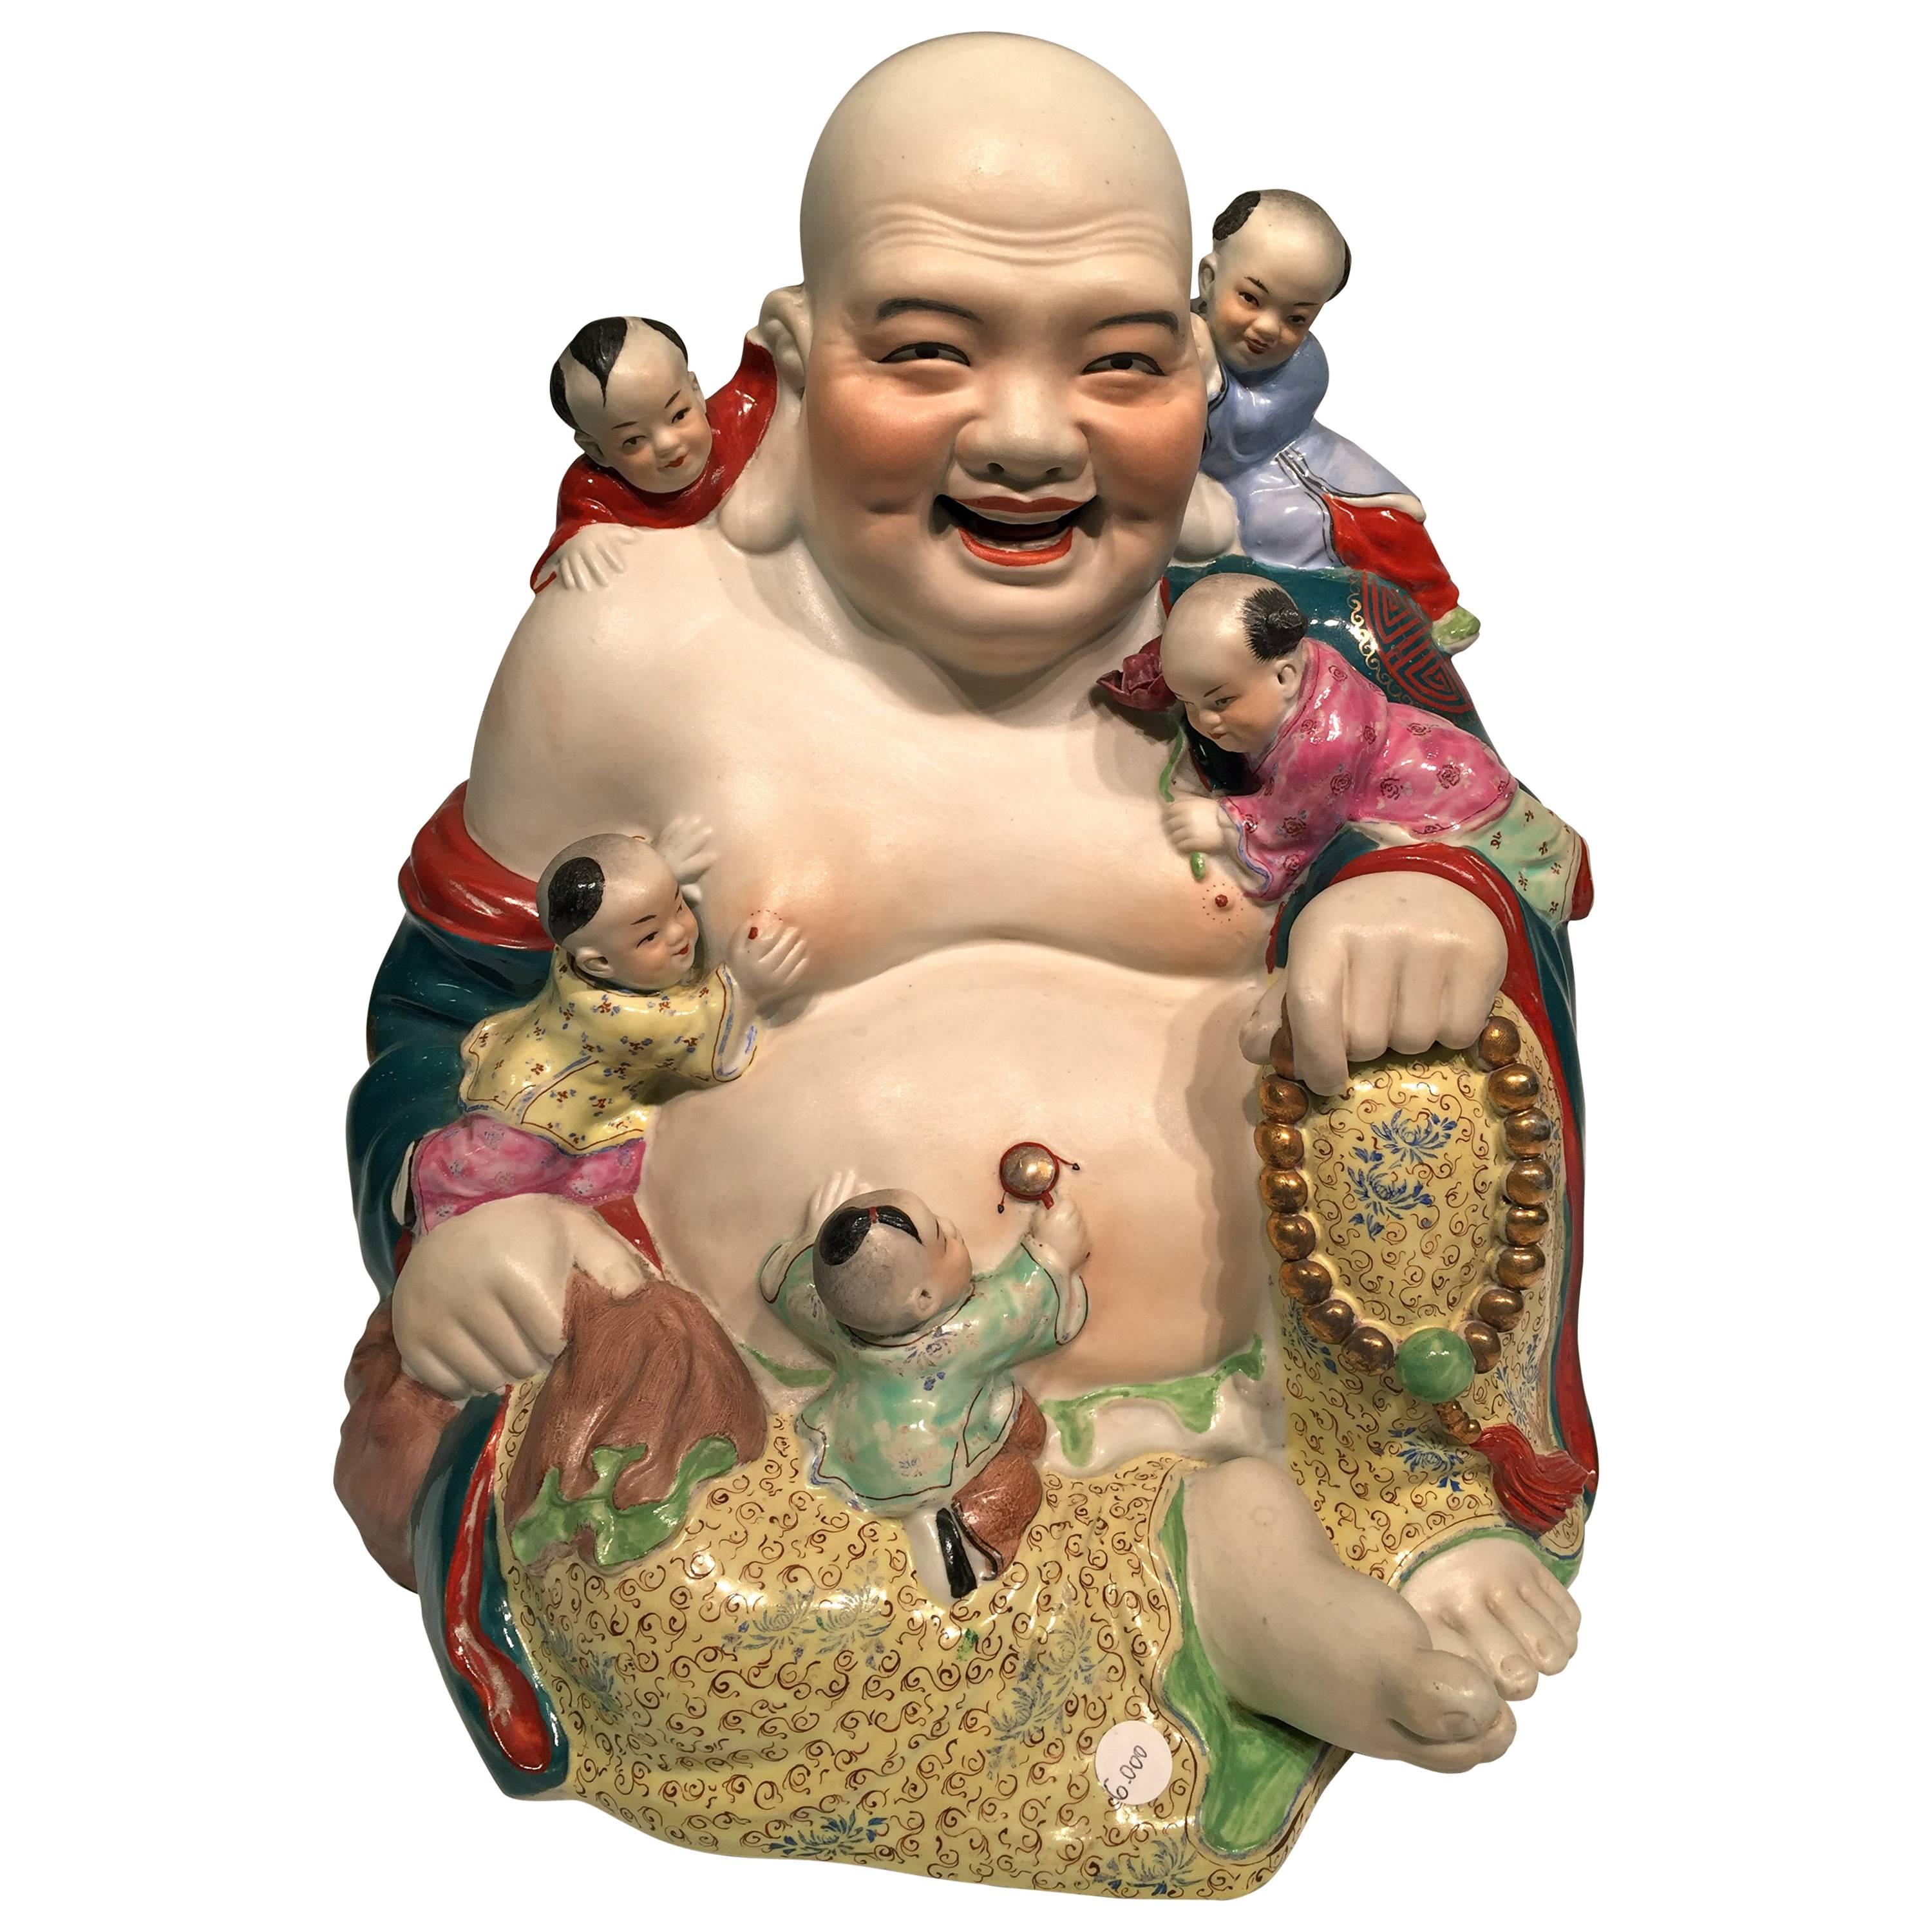 OLD CHINESE Porcelain Multicolored "Smiling Buddha", circa 1900